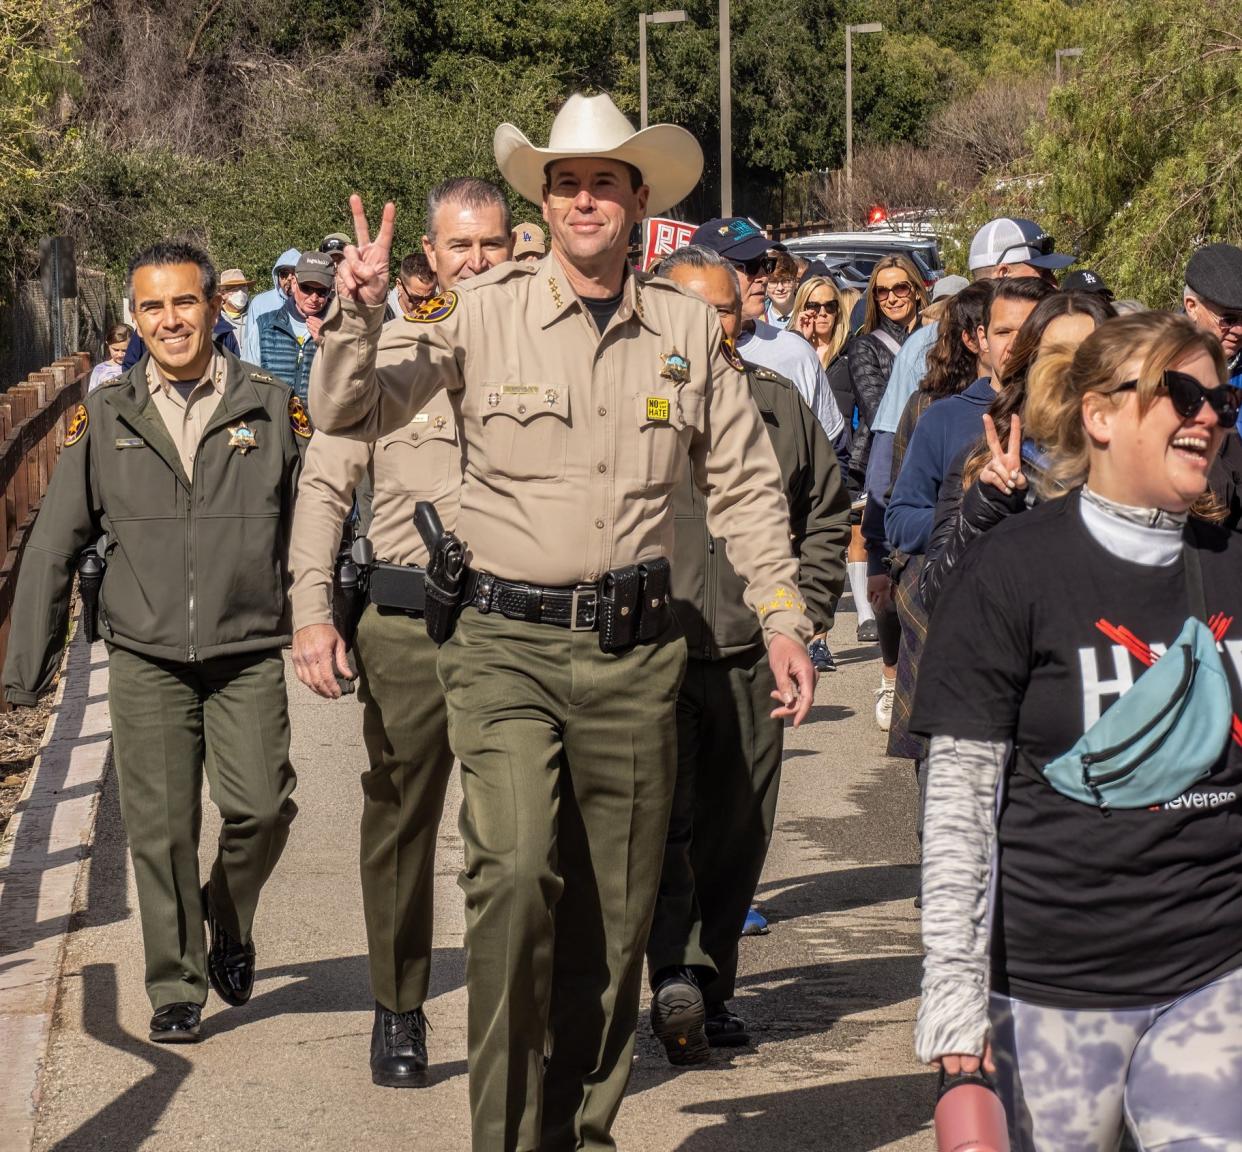 Ventura County Sheriff Jim Fryhoff participates in the Anti-Defamation League's Diversity Festival and Walk Against Hate for Ventura County on Feb. 26 in Thousand Oaks.